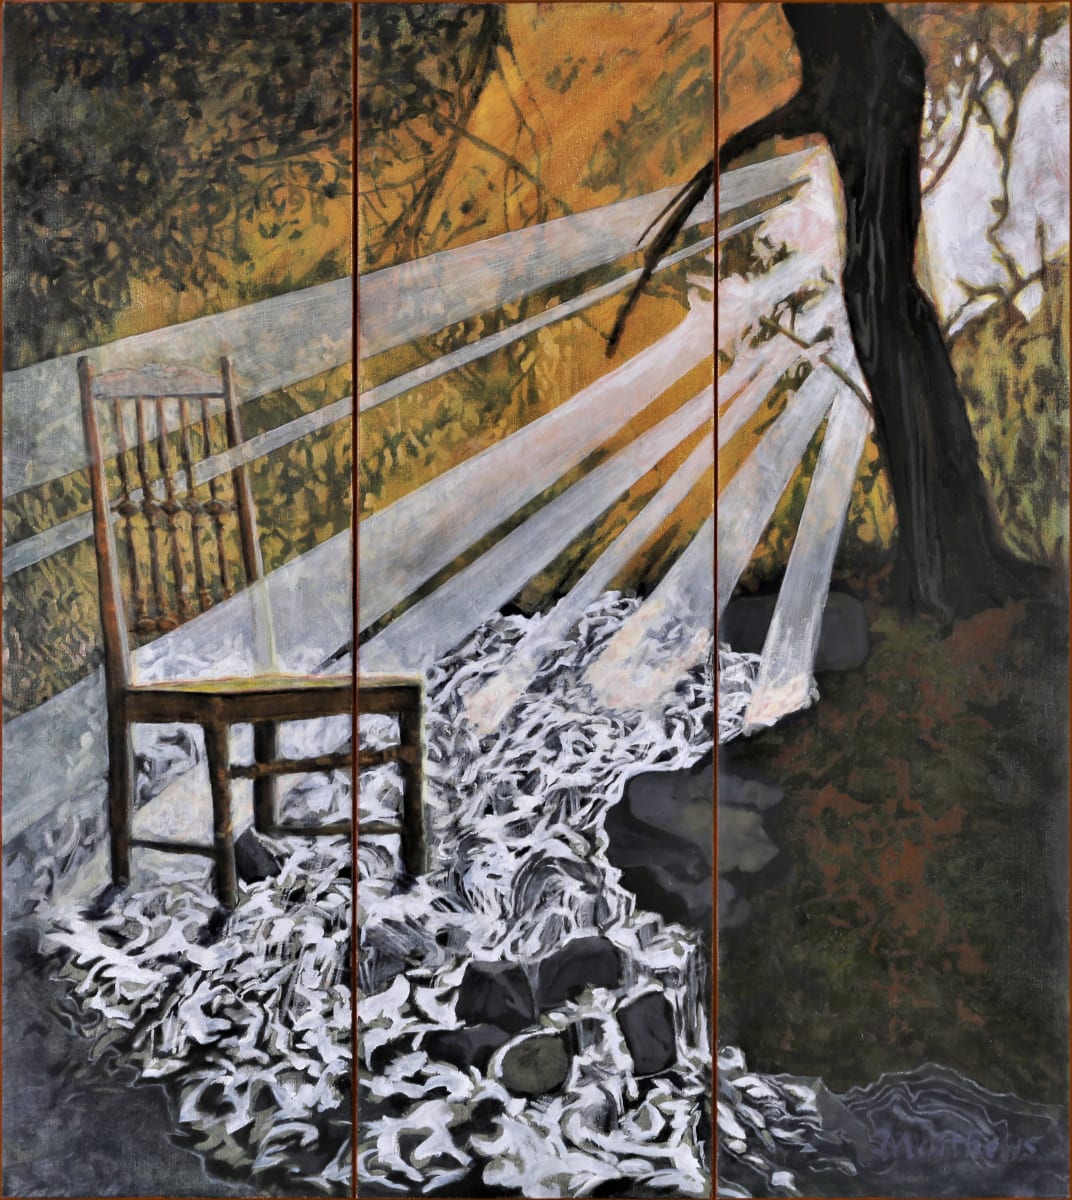 An Invitation to All by Elizabeth Matthews  Image: A family chair stands in a stream of rushing water. Light hits the chair directly even though a dying tree on the dark bank seems to be blocking the rays.  